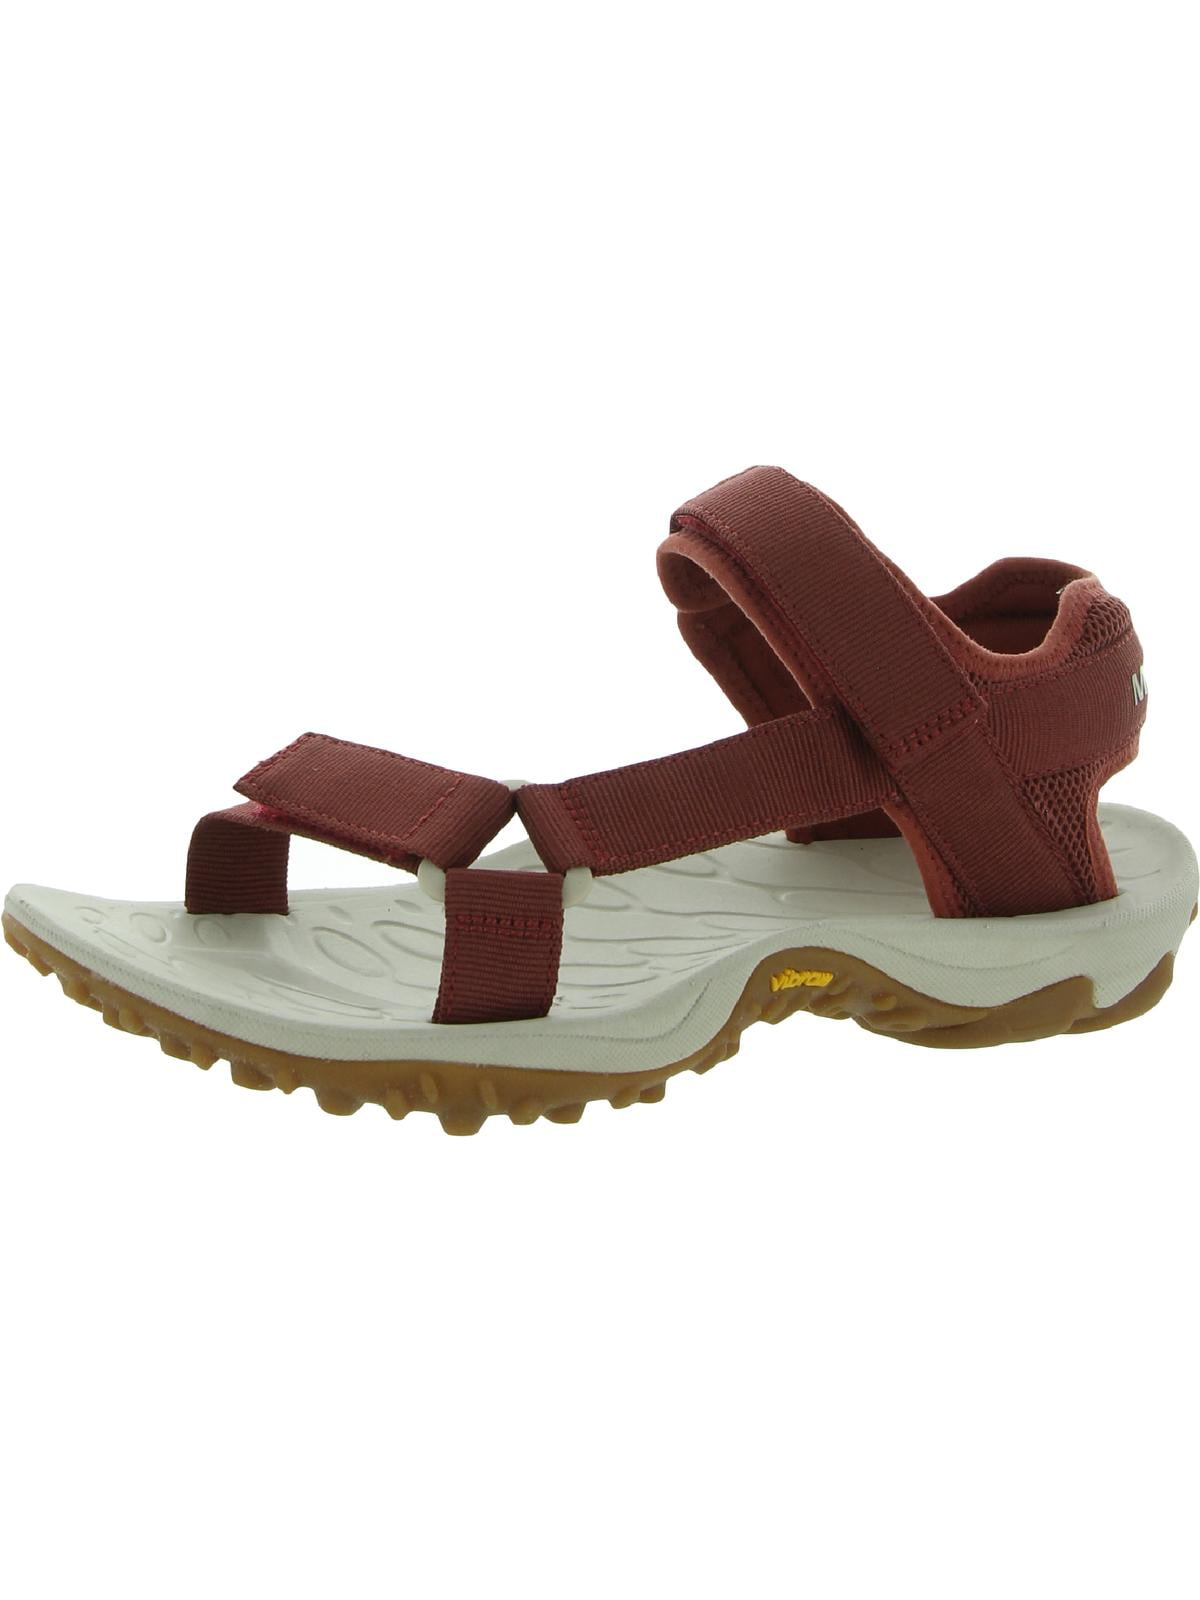 Brown Cream Sports Outdoors Merrell Womens Kahuna 4 Strap Shoes Sandals 